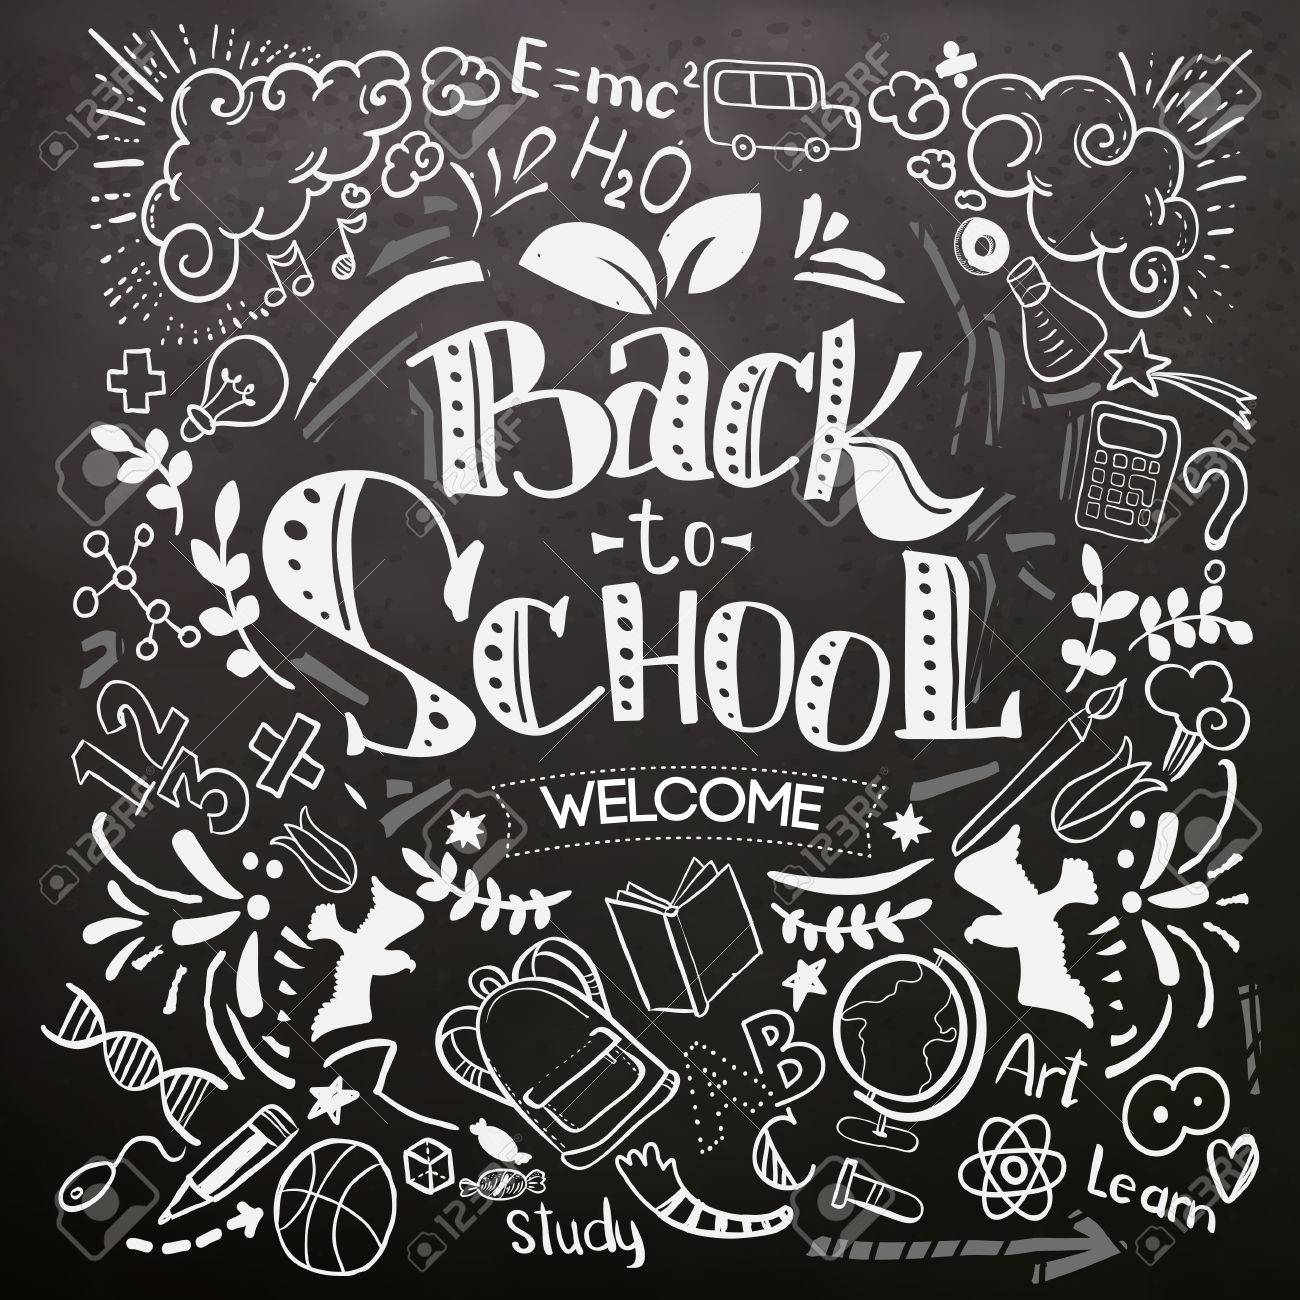 Royalty free back to school chalk drawing with those words and school items drawn in chalk